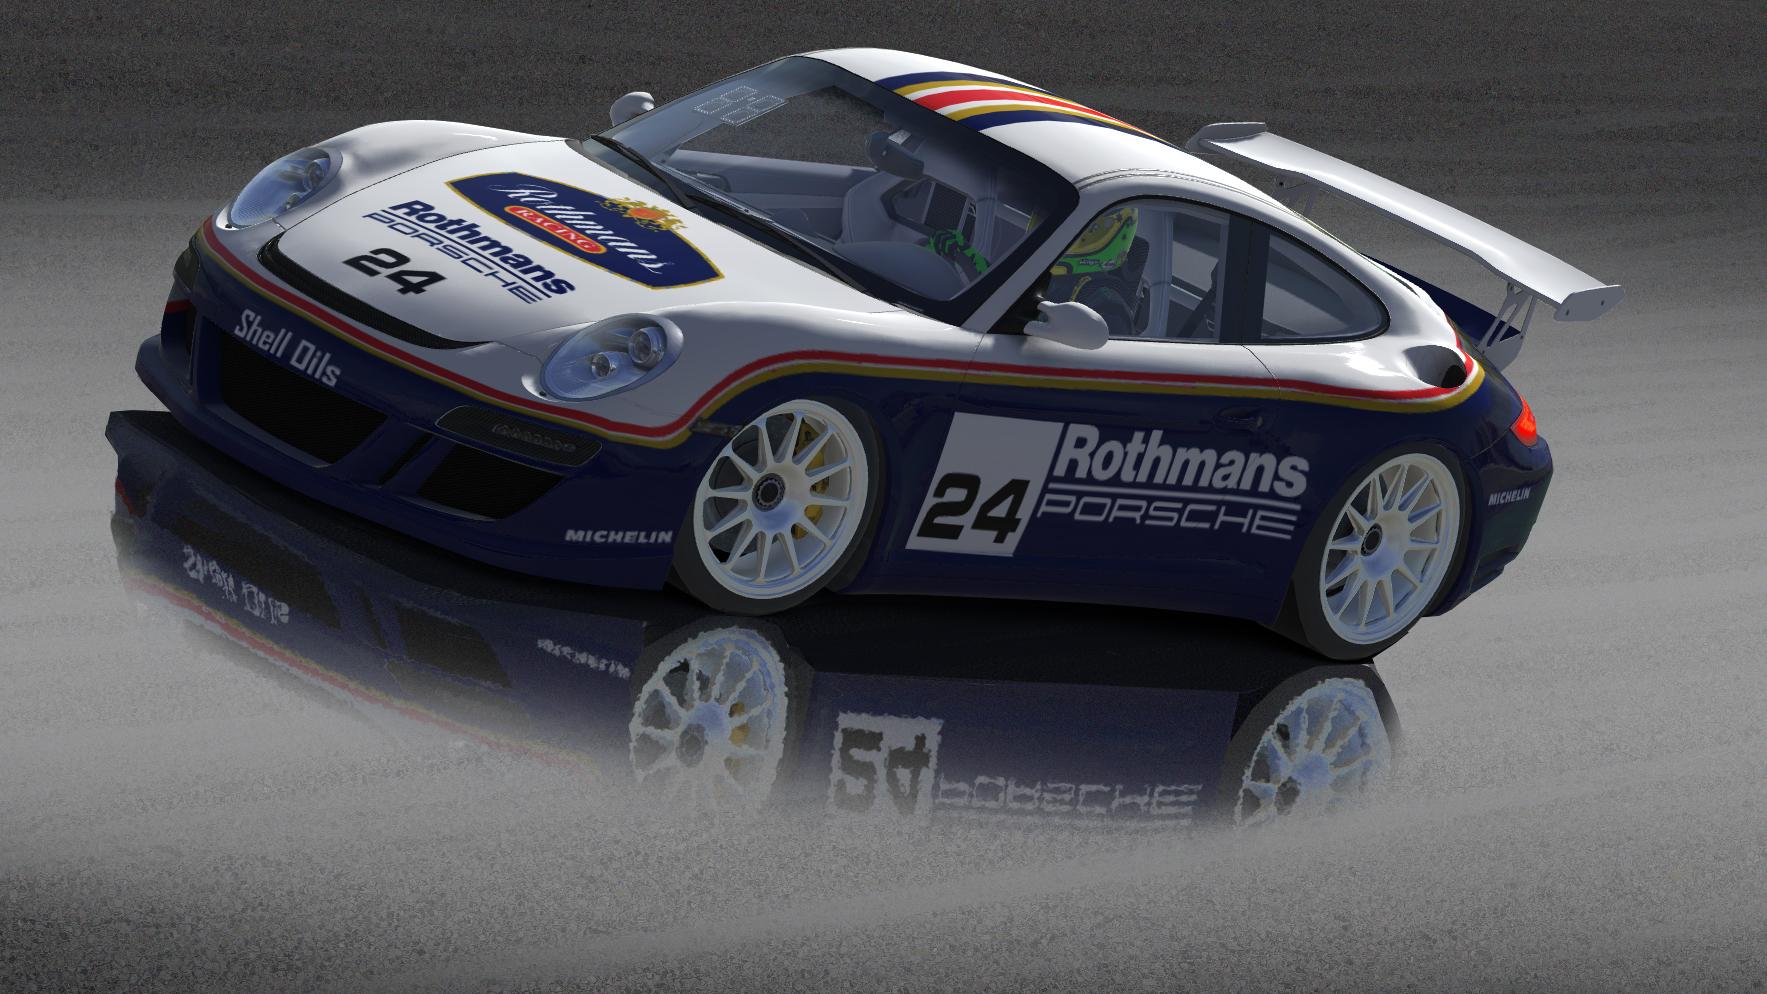 Rothmans Porsche by David Hingston - Trading Paints